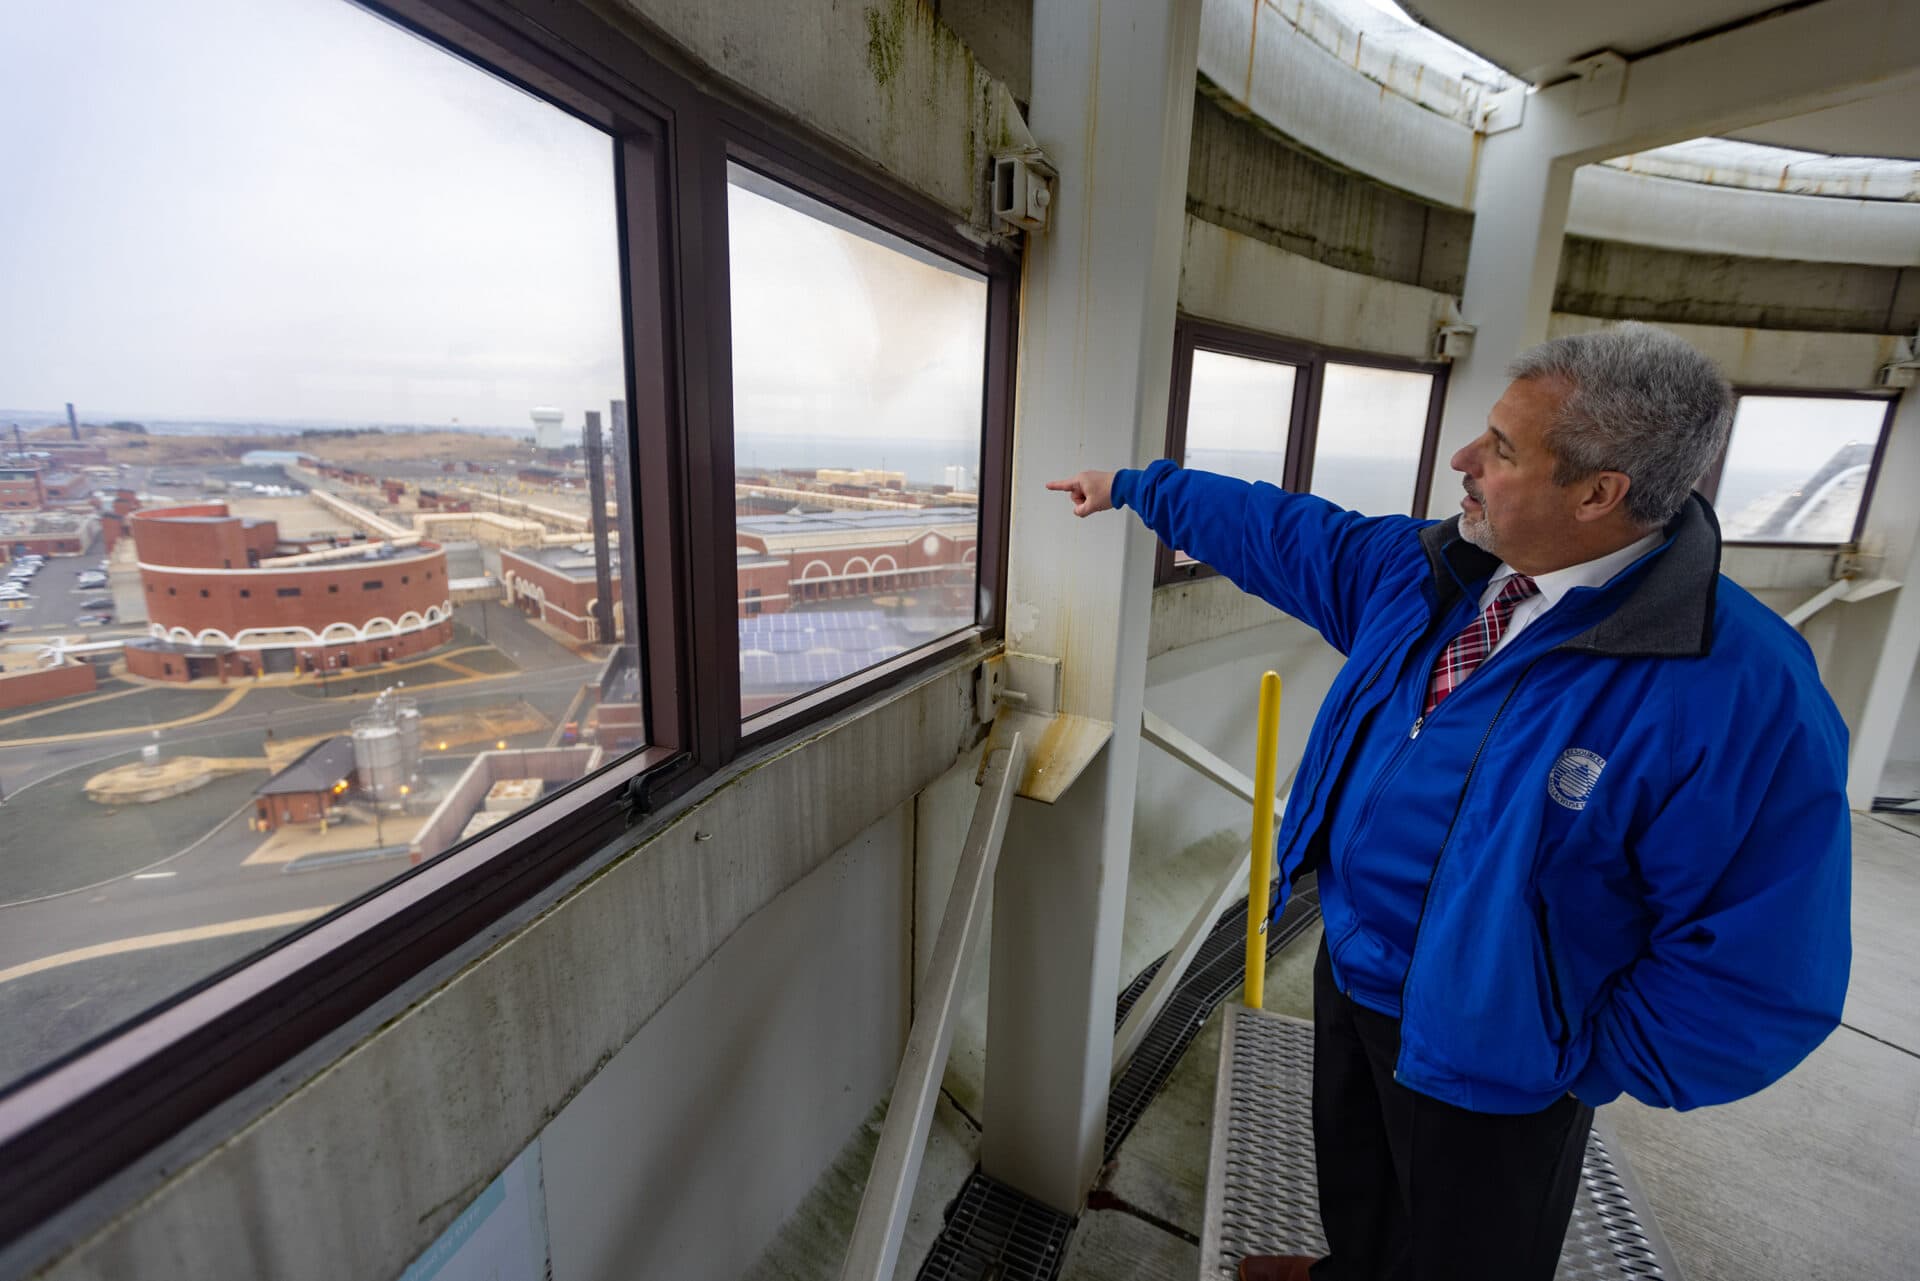 David Duest, director of Deer Island Wastewater Treatment Plant, points toward the facility. (Jesse Costa/WBUR)